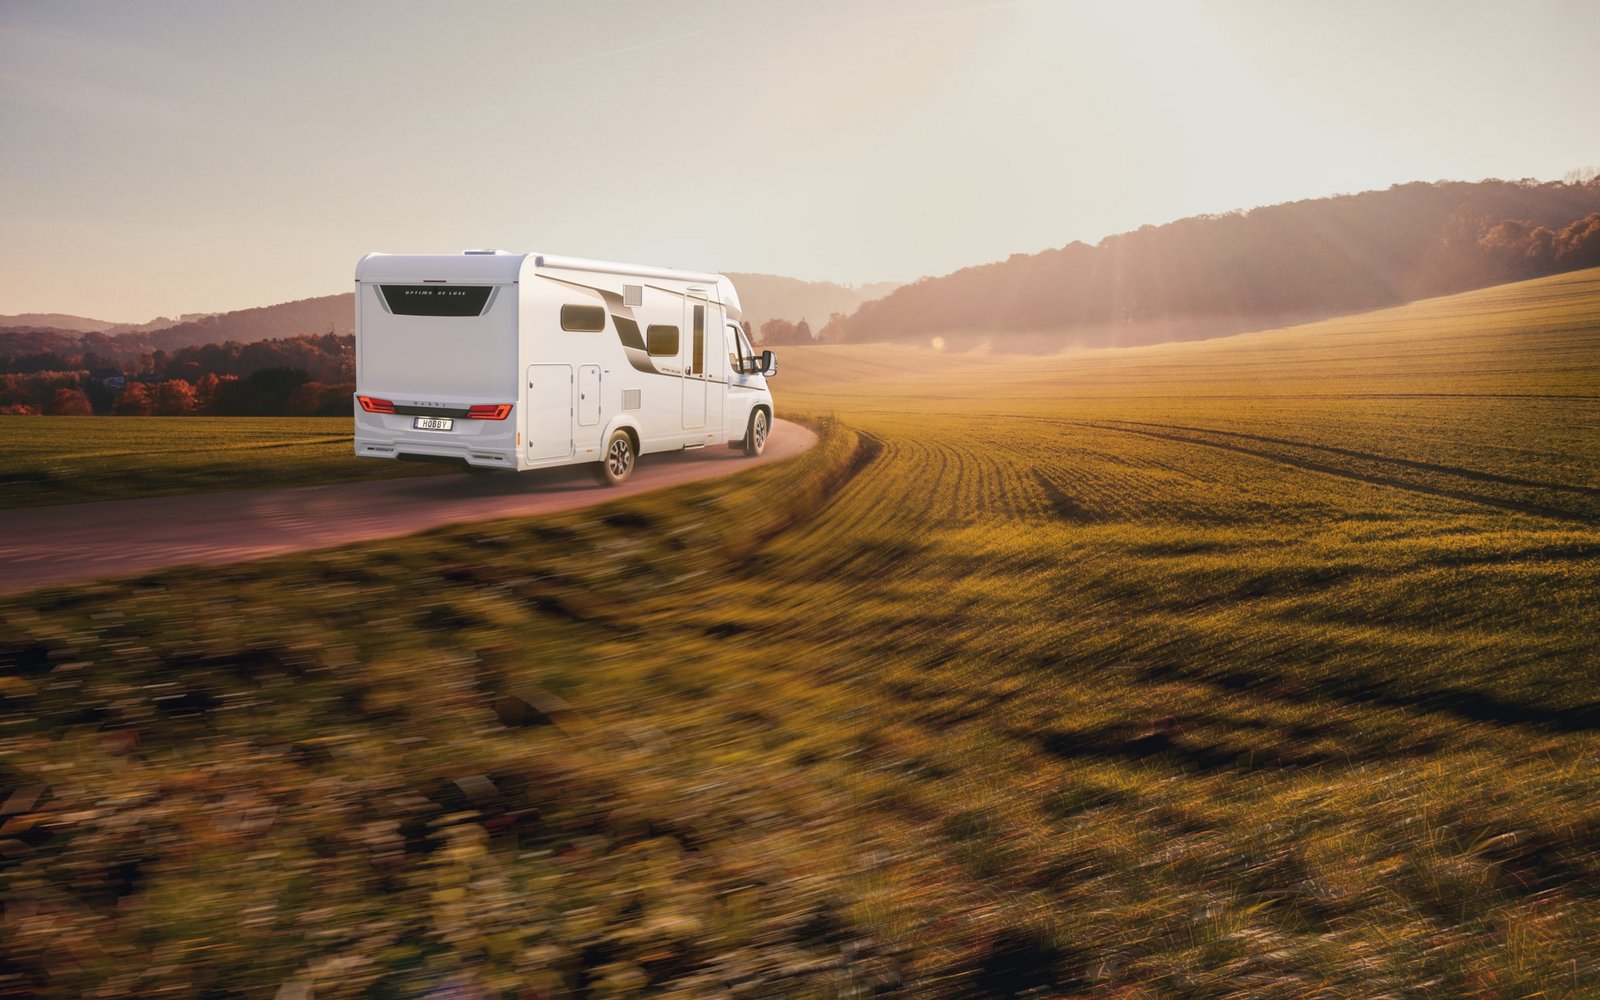 Hobby Optima deluxe_motorhome driving country side